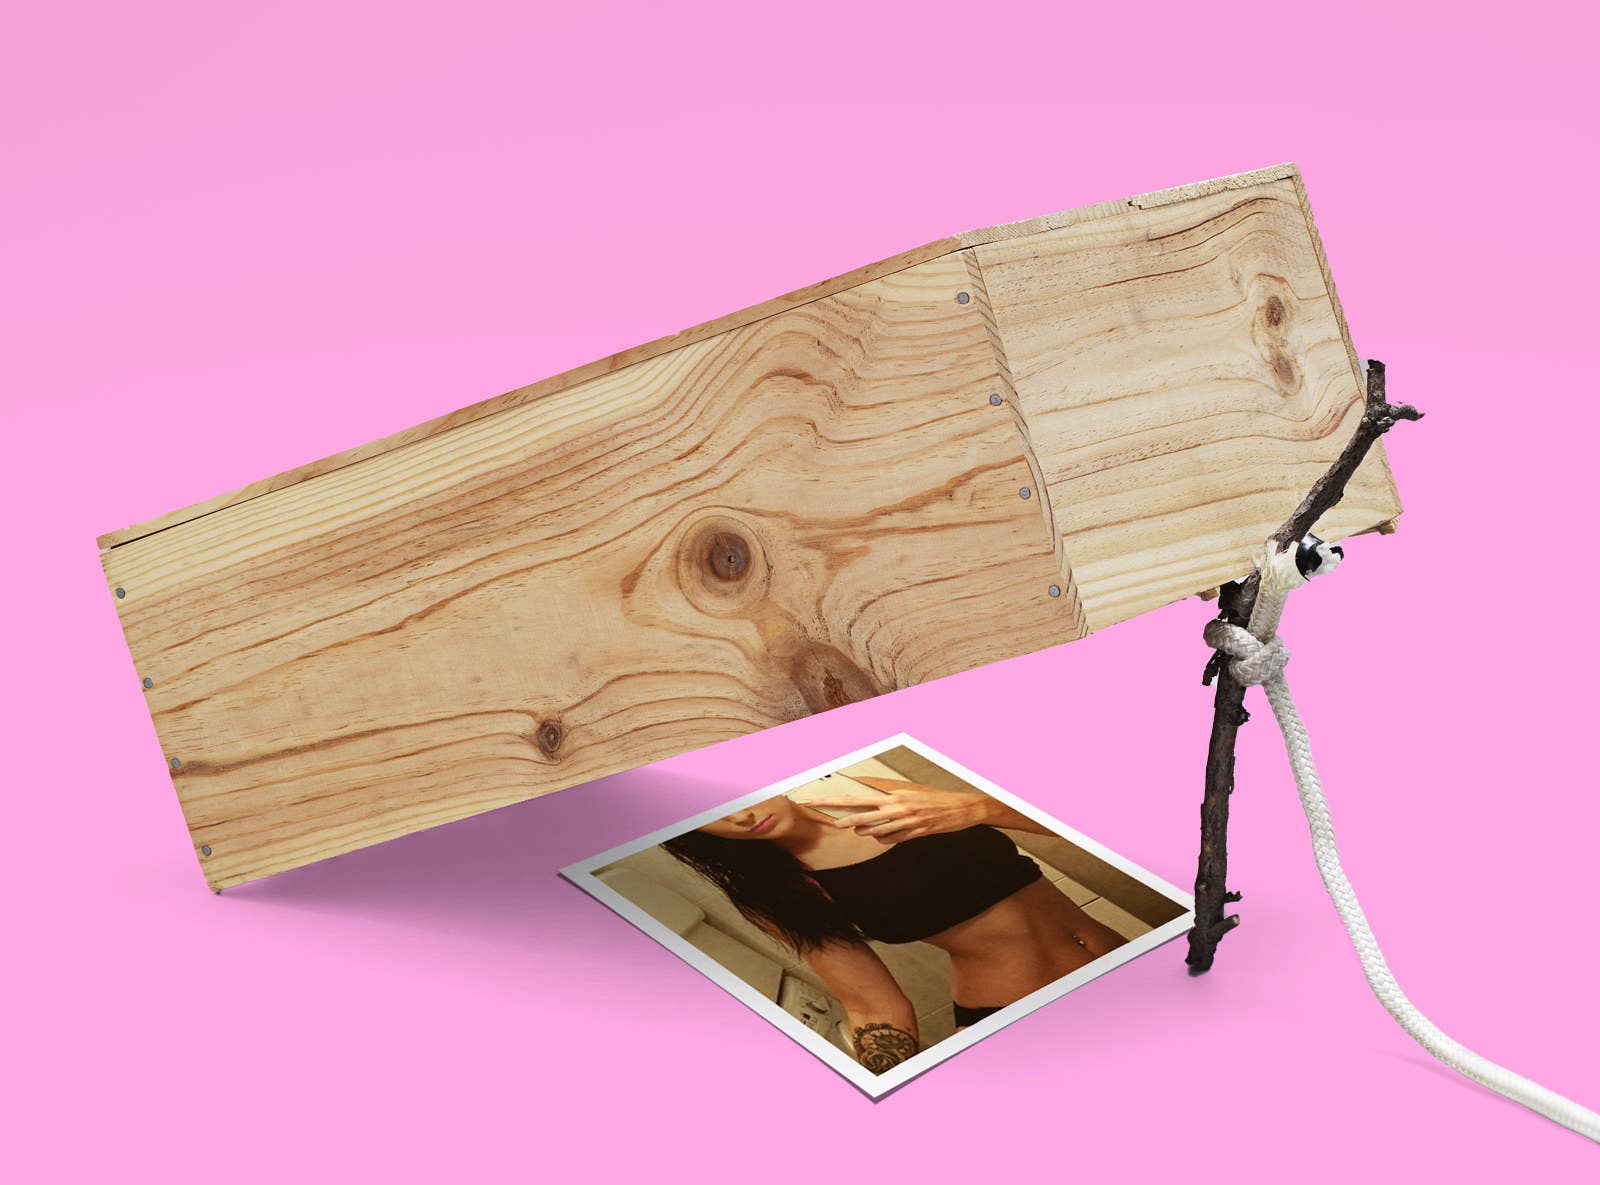 A rudimentary trap shows a wooden box propped up by a stick attached to a rope on top of a seductive mirror selfie showing a woman wearing a black top